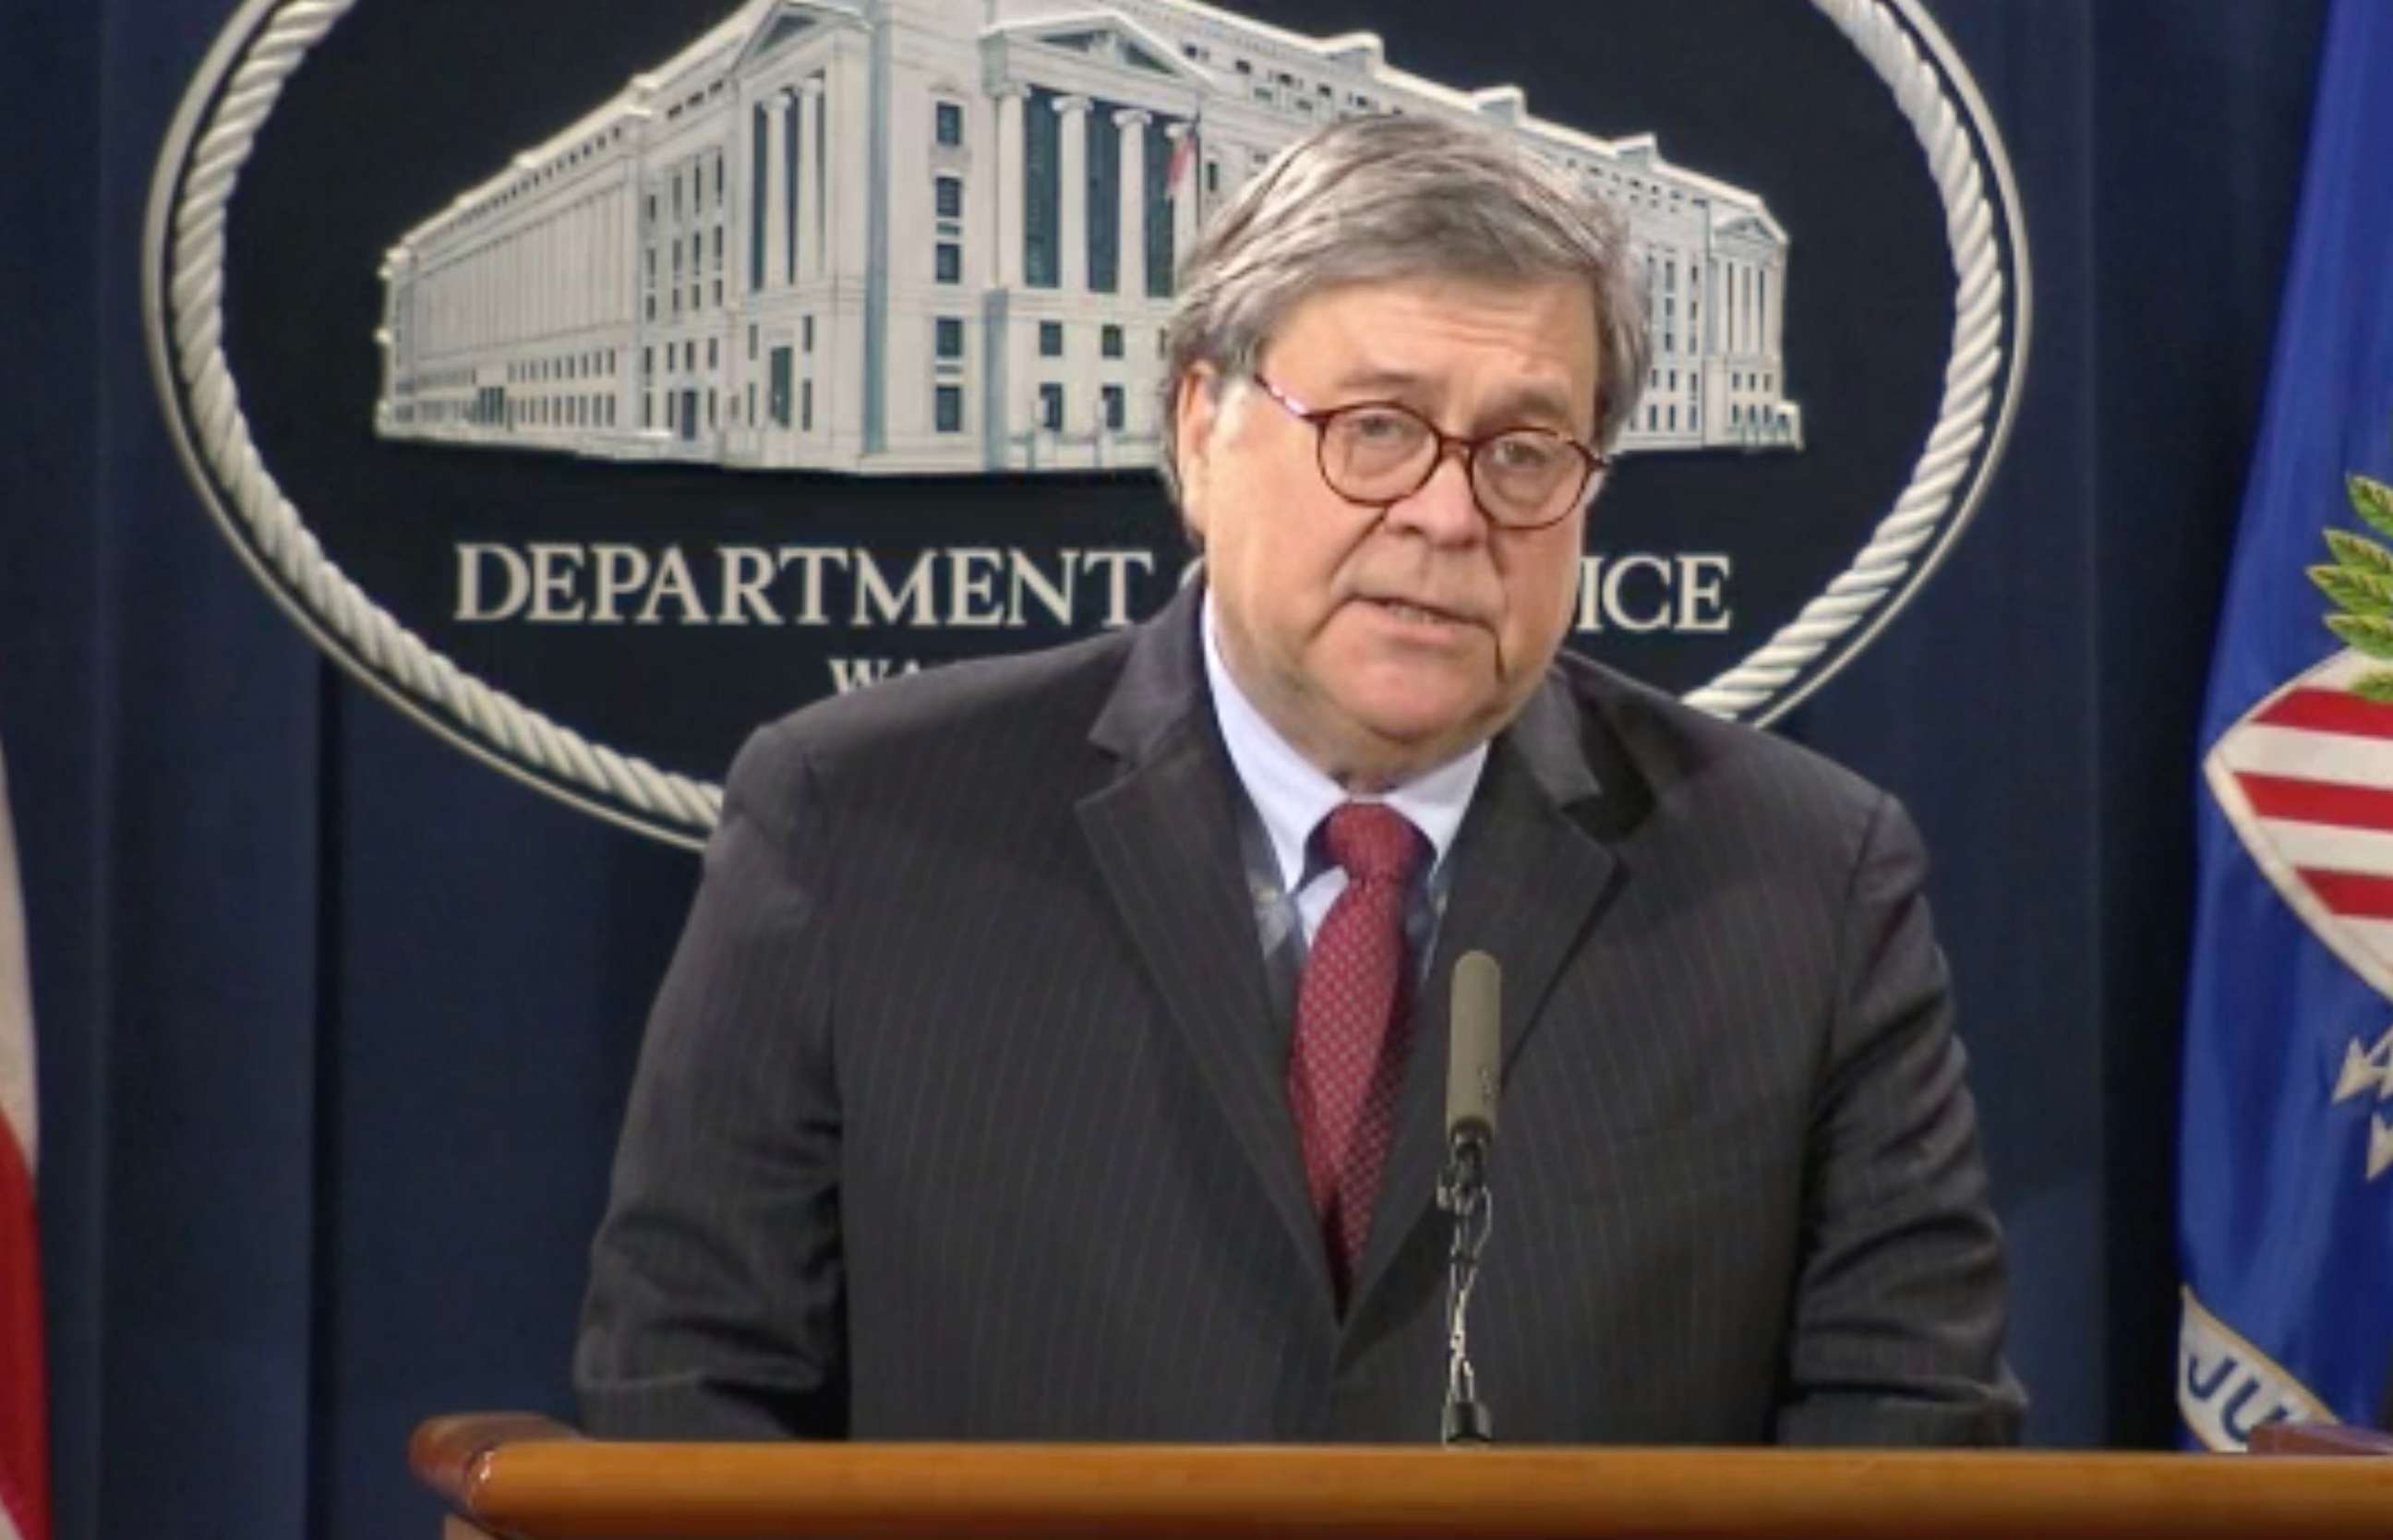 PHOTO: Attorney General William Barr speaks at a press conference in Washington, D.C., June 4, 2020.